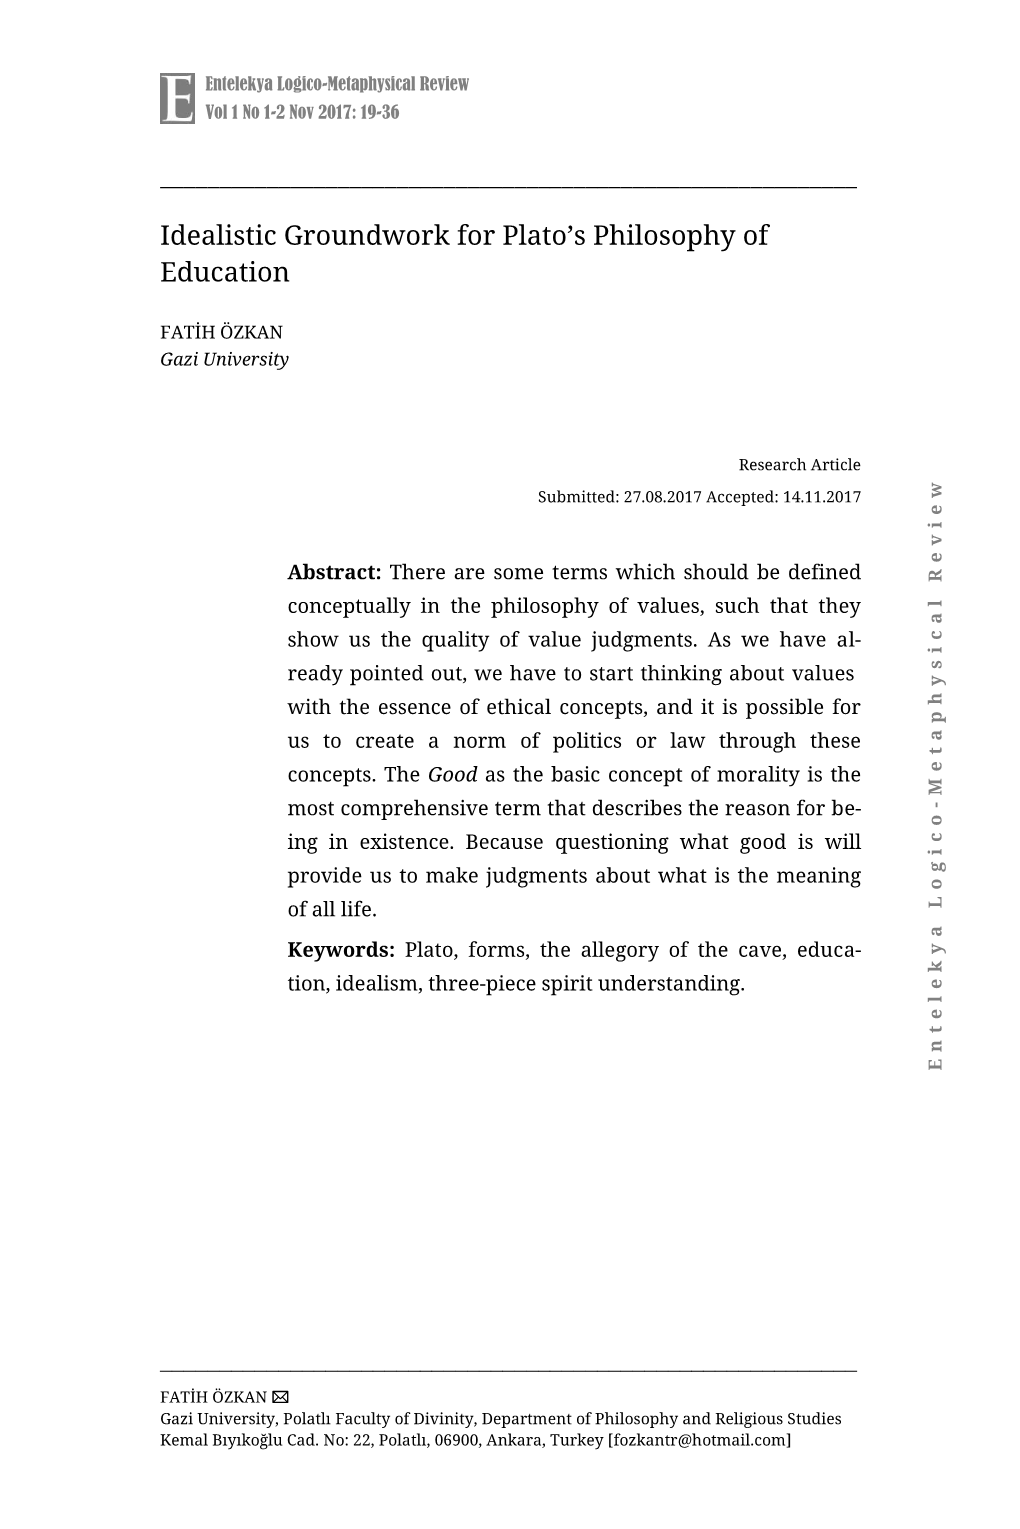 Idealistic Groundwork for Plato's Philosophy of Education